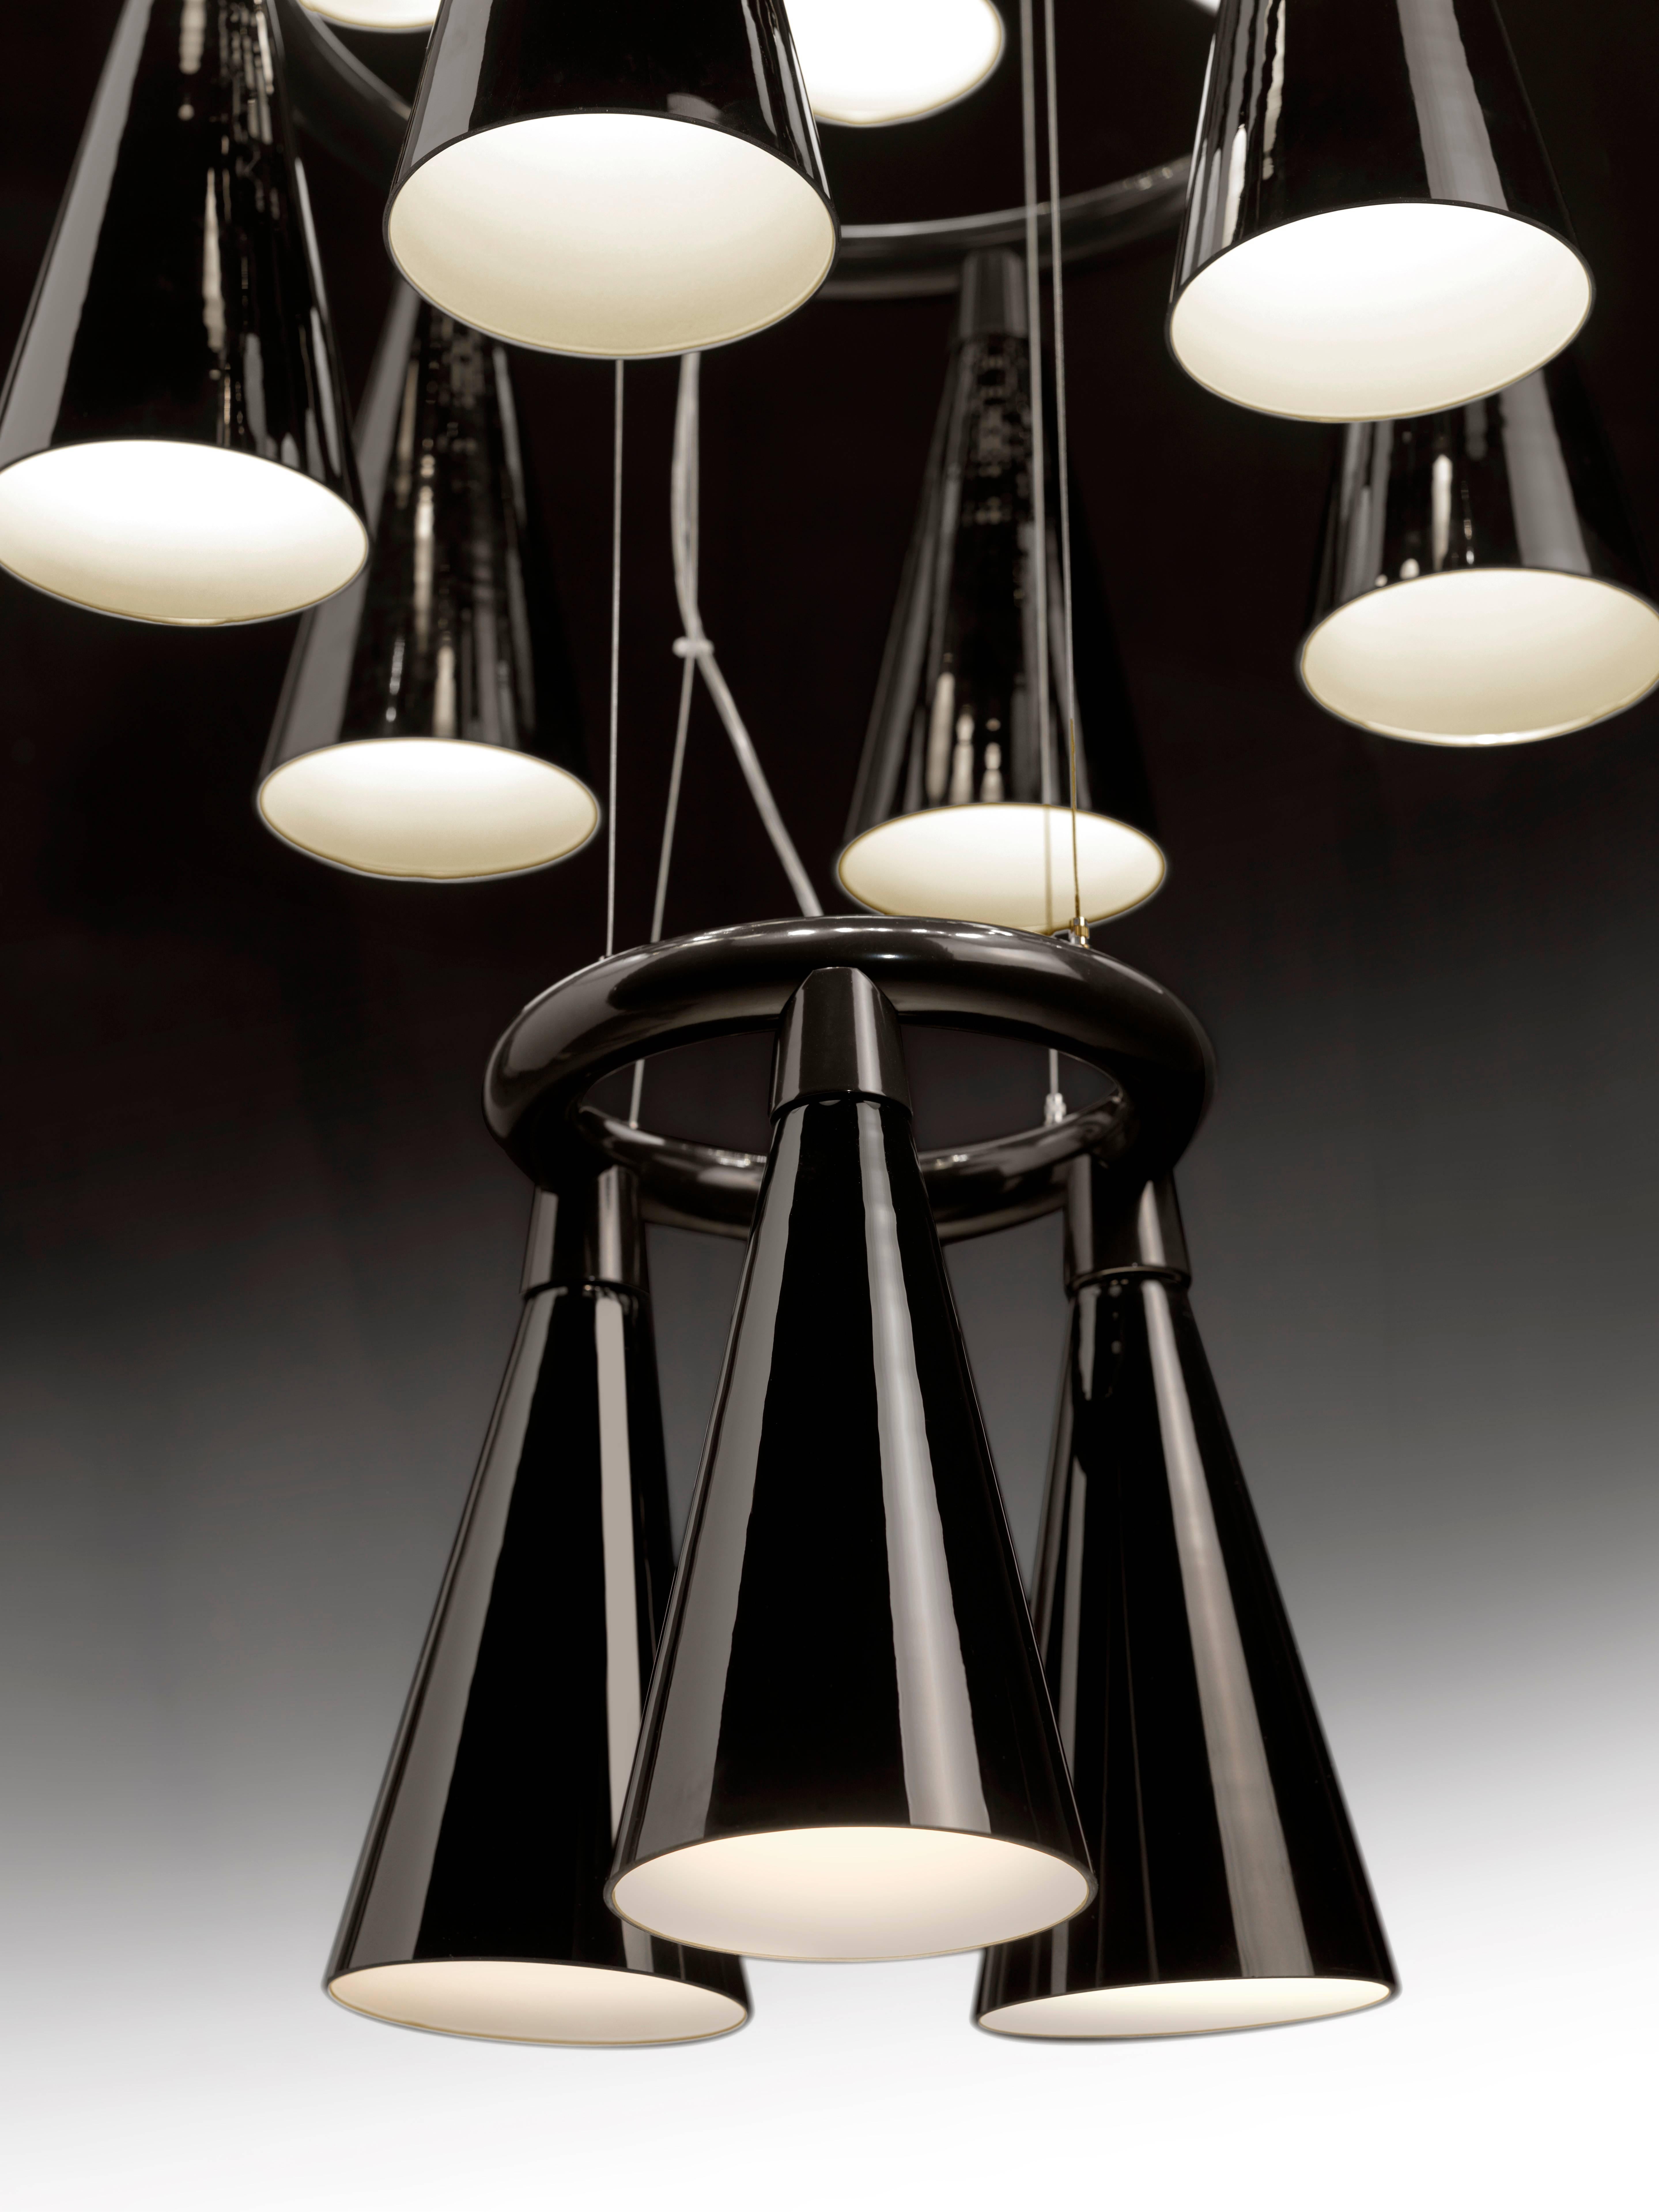 Komori: A chandelier reminiscent of a colony of bats hanging upside down from a tree branch or the ceiling of a cave. Evenly spaced glass shades blown by Murano glass artisans enclose LEDs, and cast their light downwards. Bases can be connected to